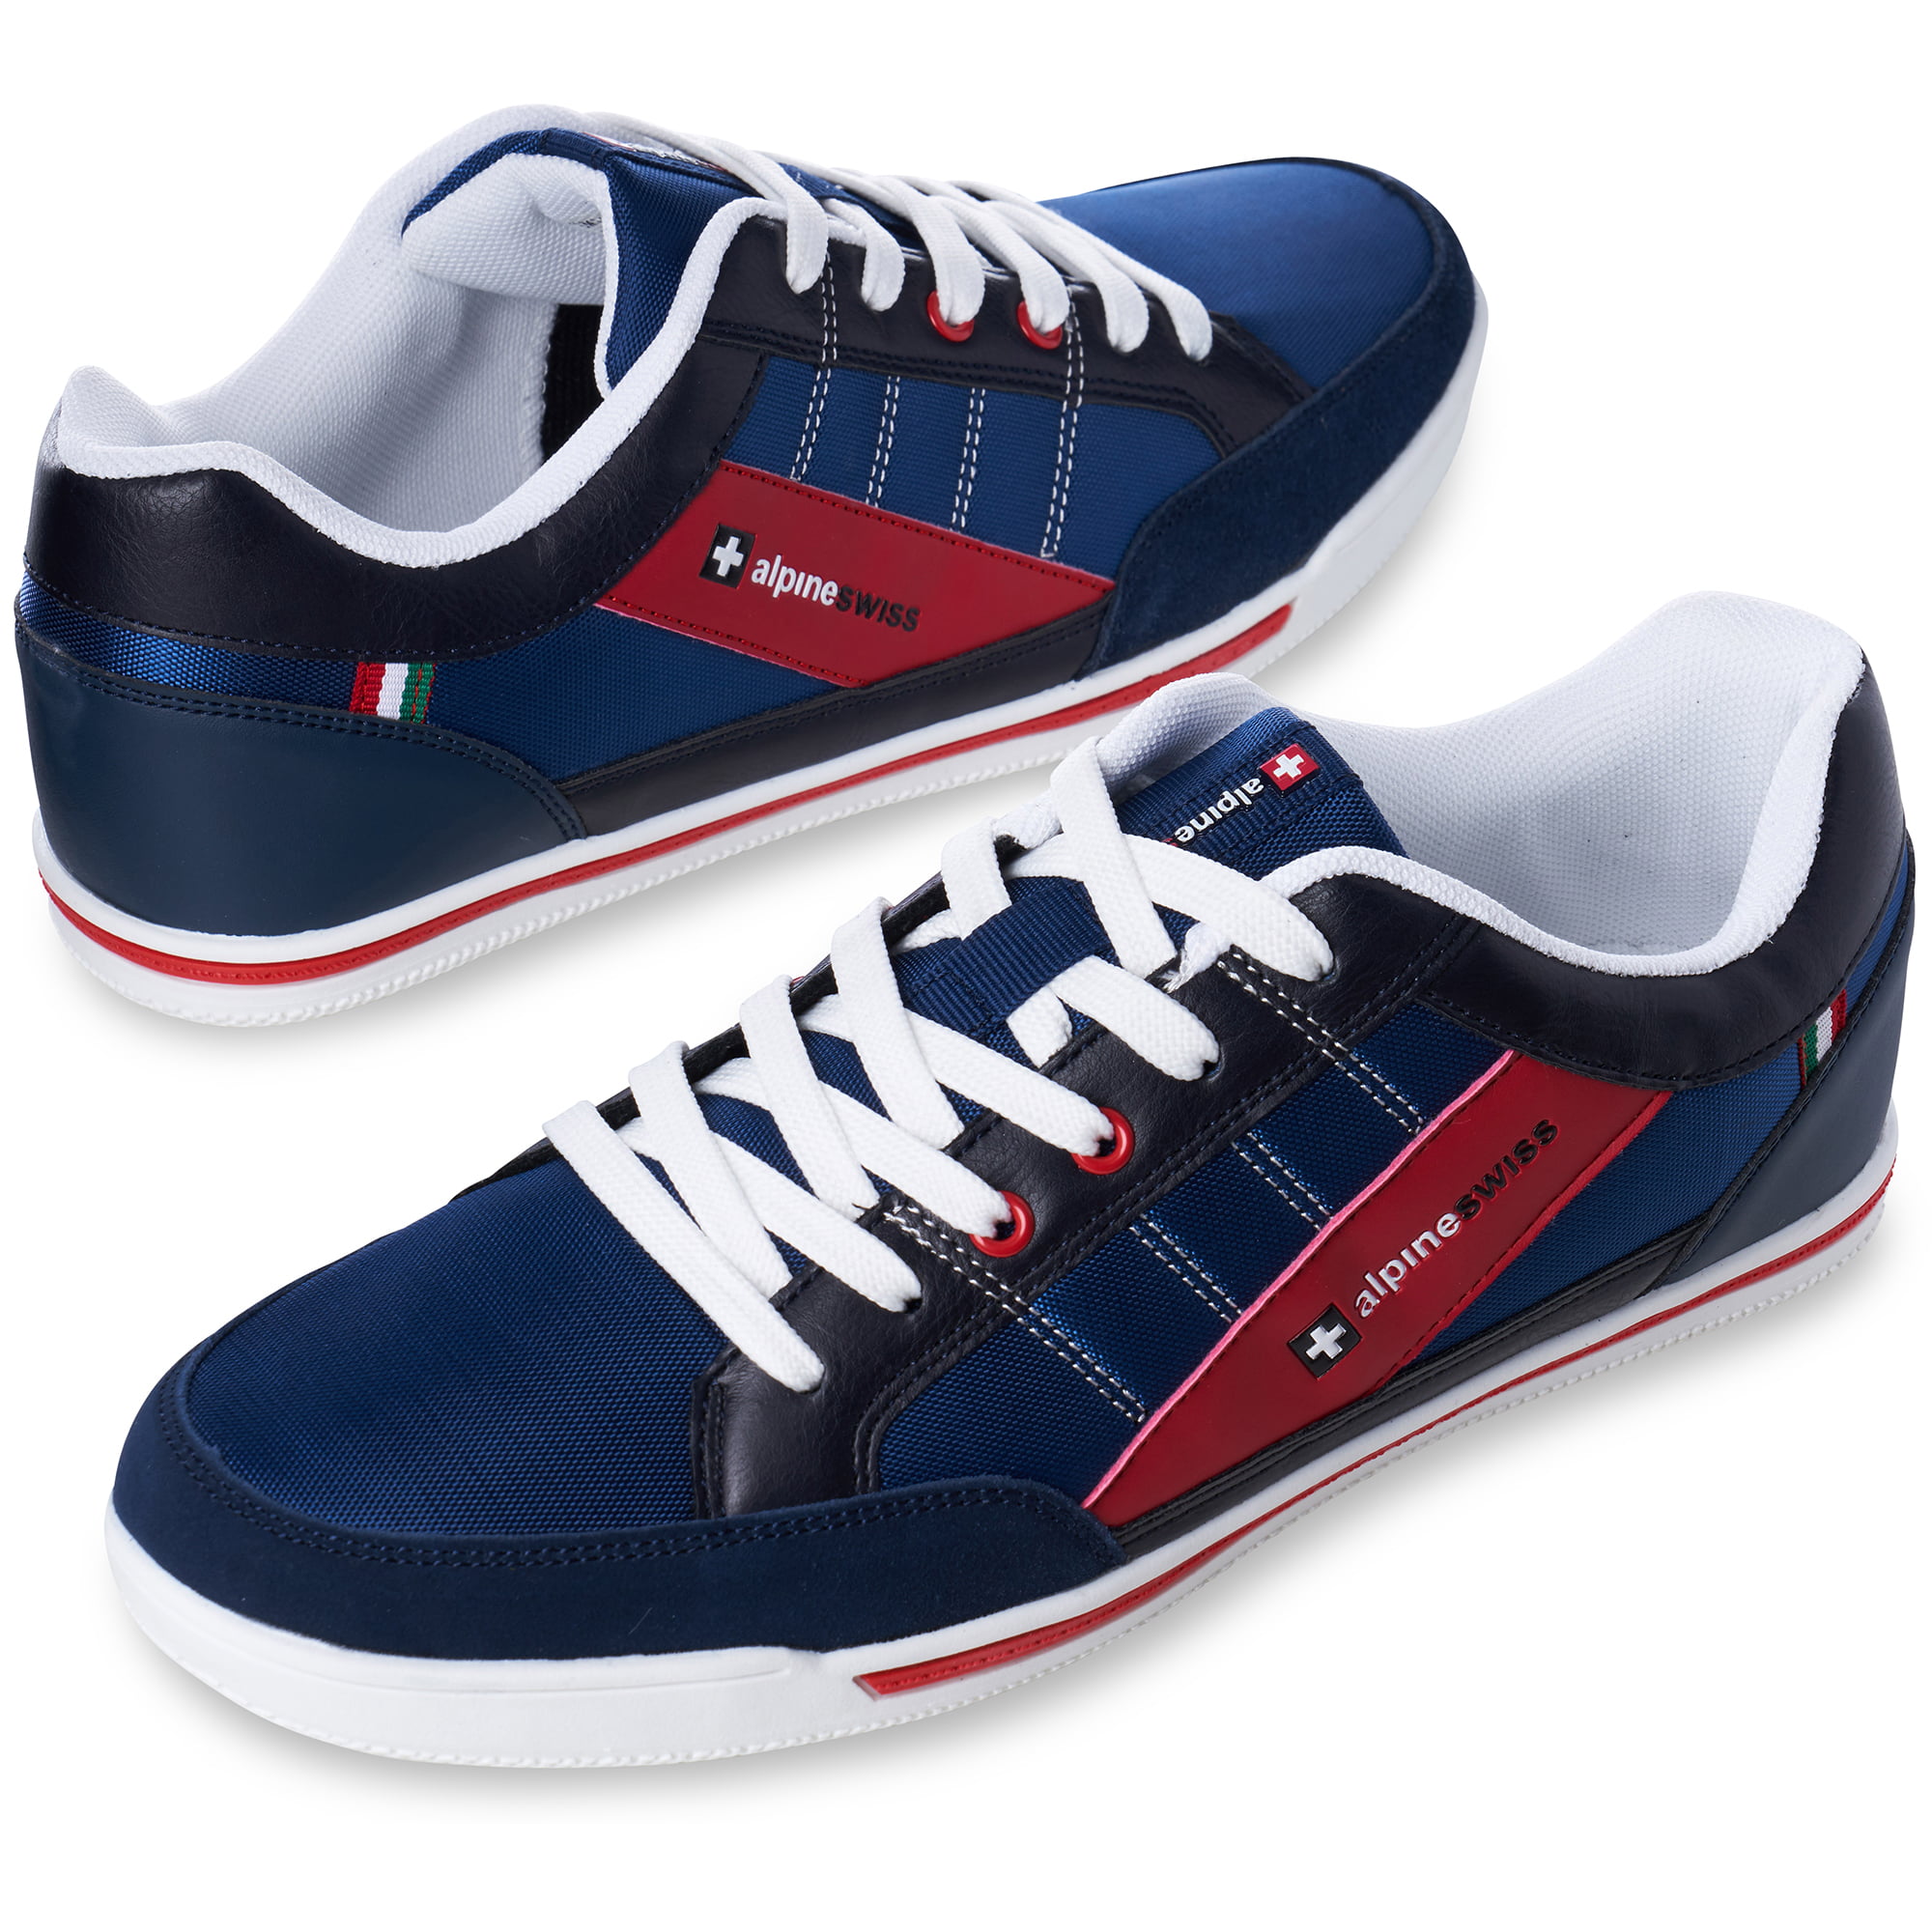 alpine swiss stefan mens retro fashion sneakers tennis shoes casual athletic new